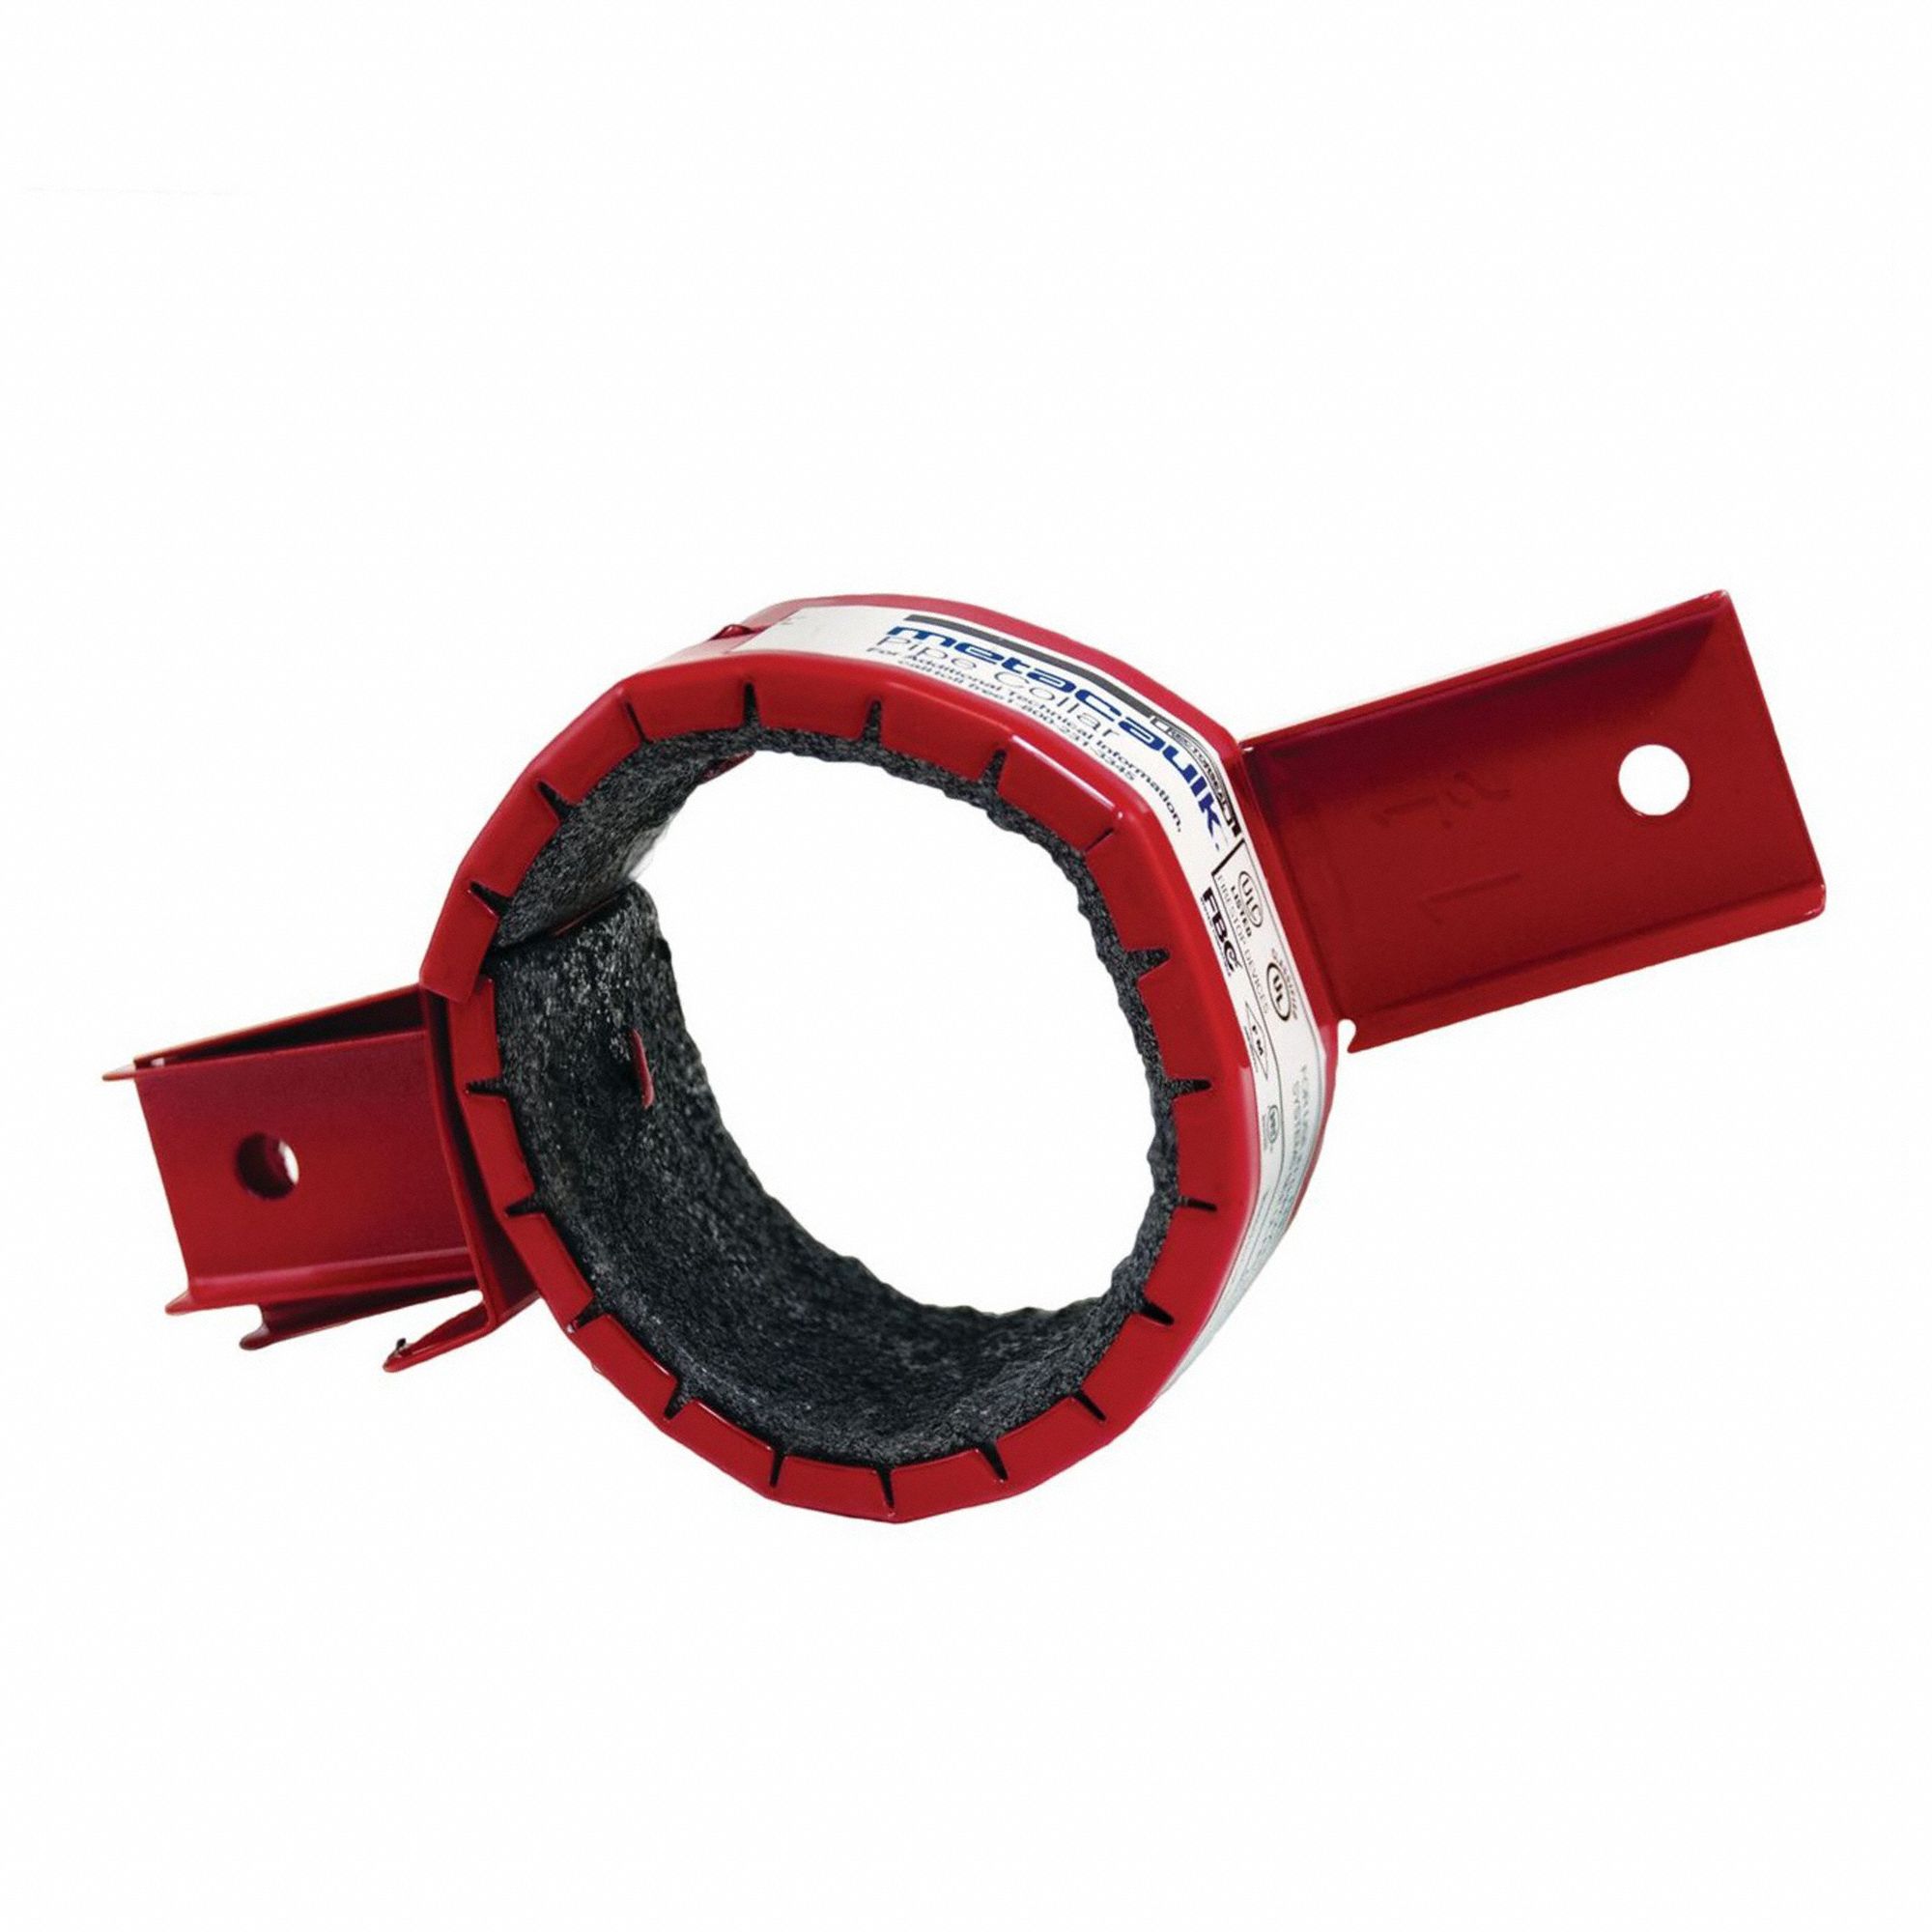 Firestop Pipe Collar: 1 1/2 in For Pipe Size, Metal Pipe/Plastic Pipe, Up to 3 hr, 5 in Ht